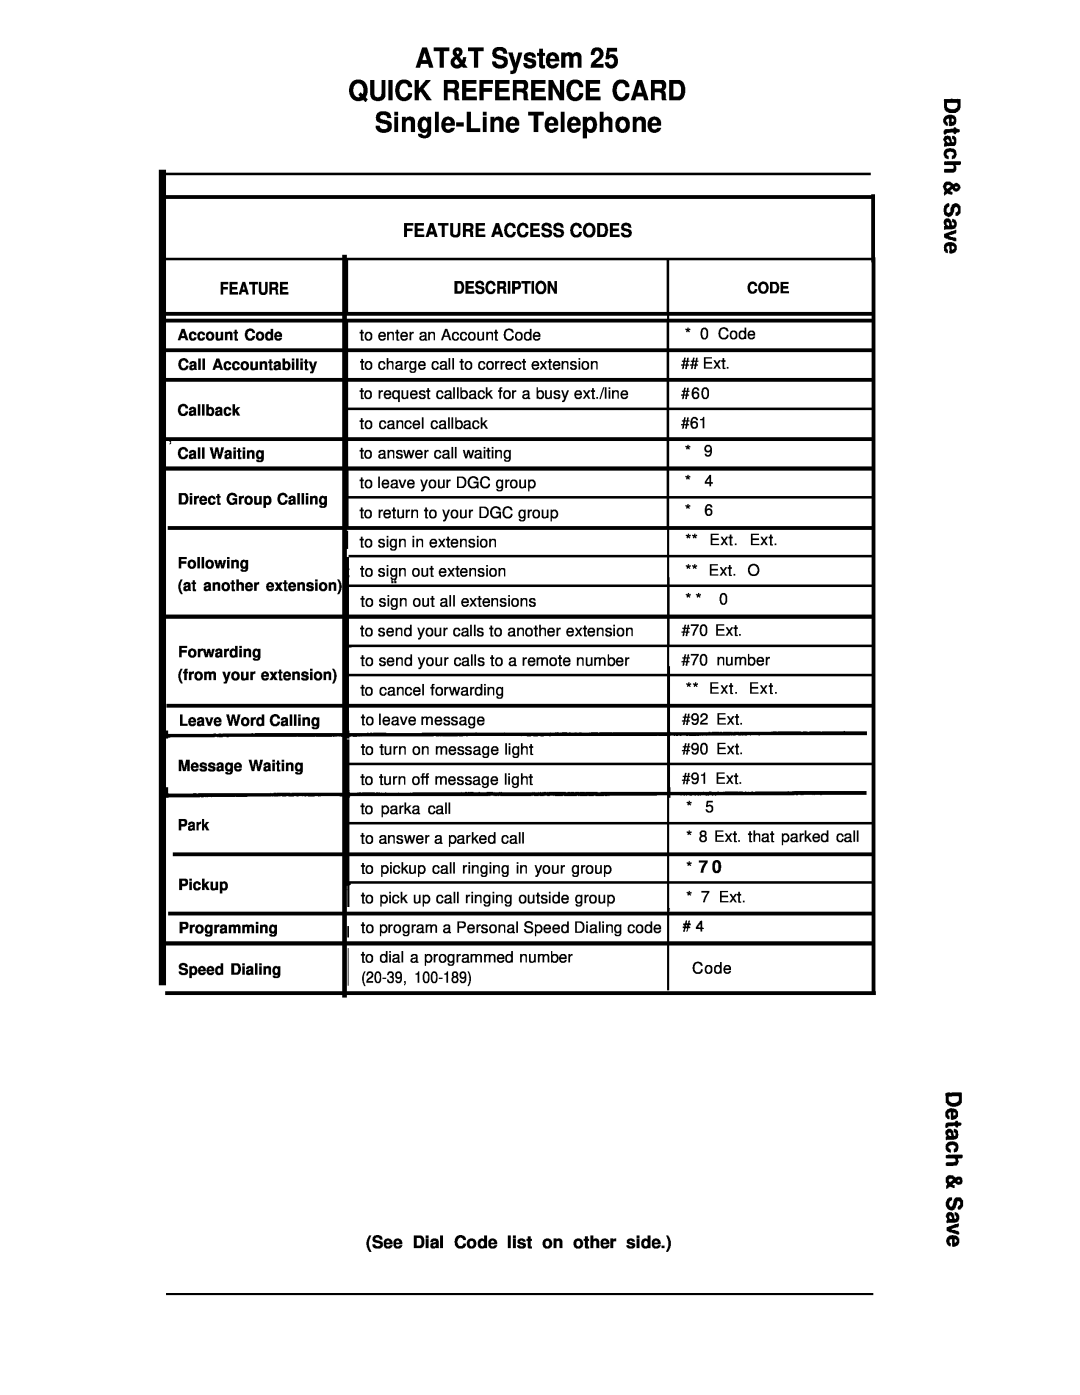 3D Connexion 555-540-702 manual AT&T System QUICK REFERENCE CARD, Single-LineTelephone, Feature Access Codes, Description 